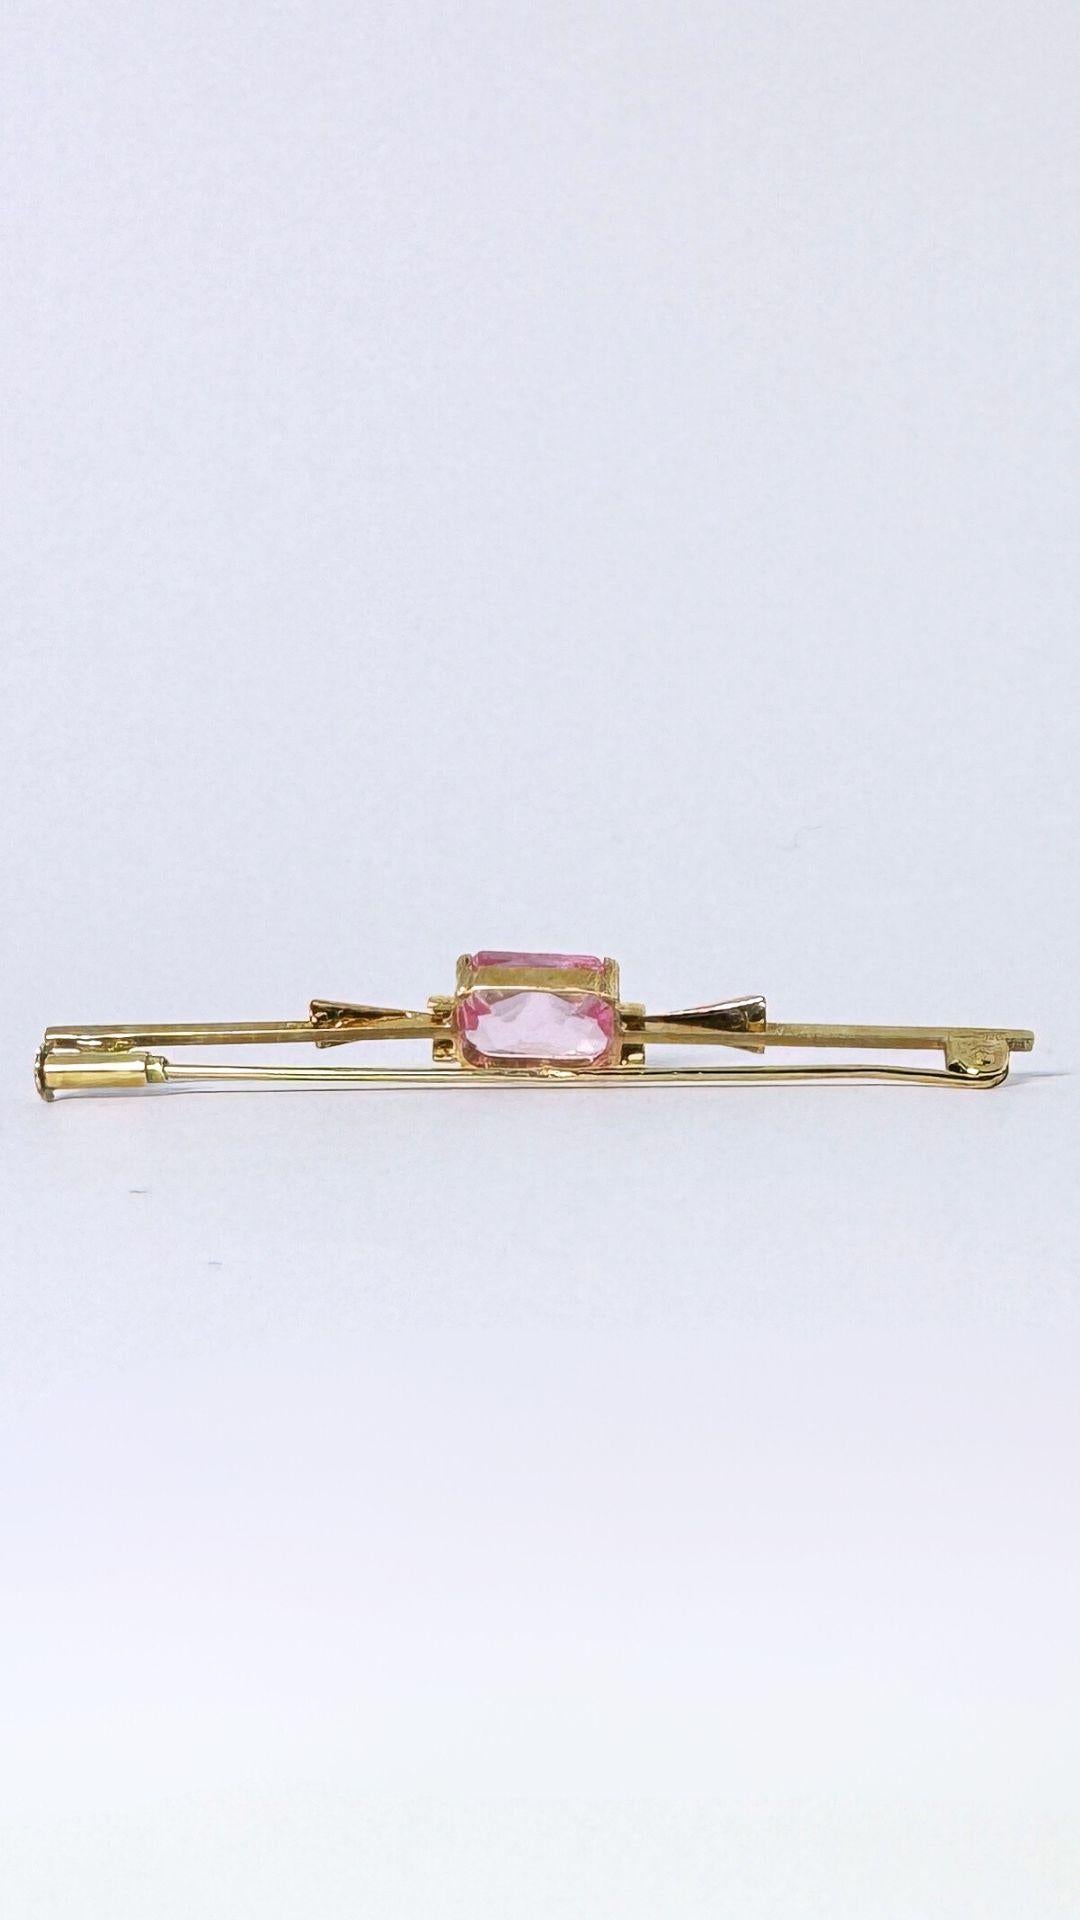 Emerald Cut Vintage European pin, 14 carat yellow gold, with amethyst, rose de france For Sale